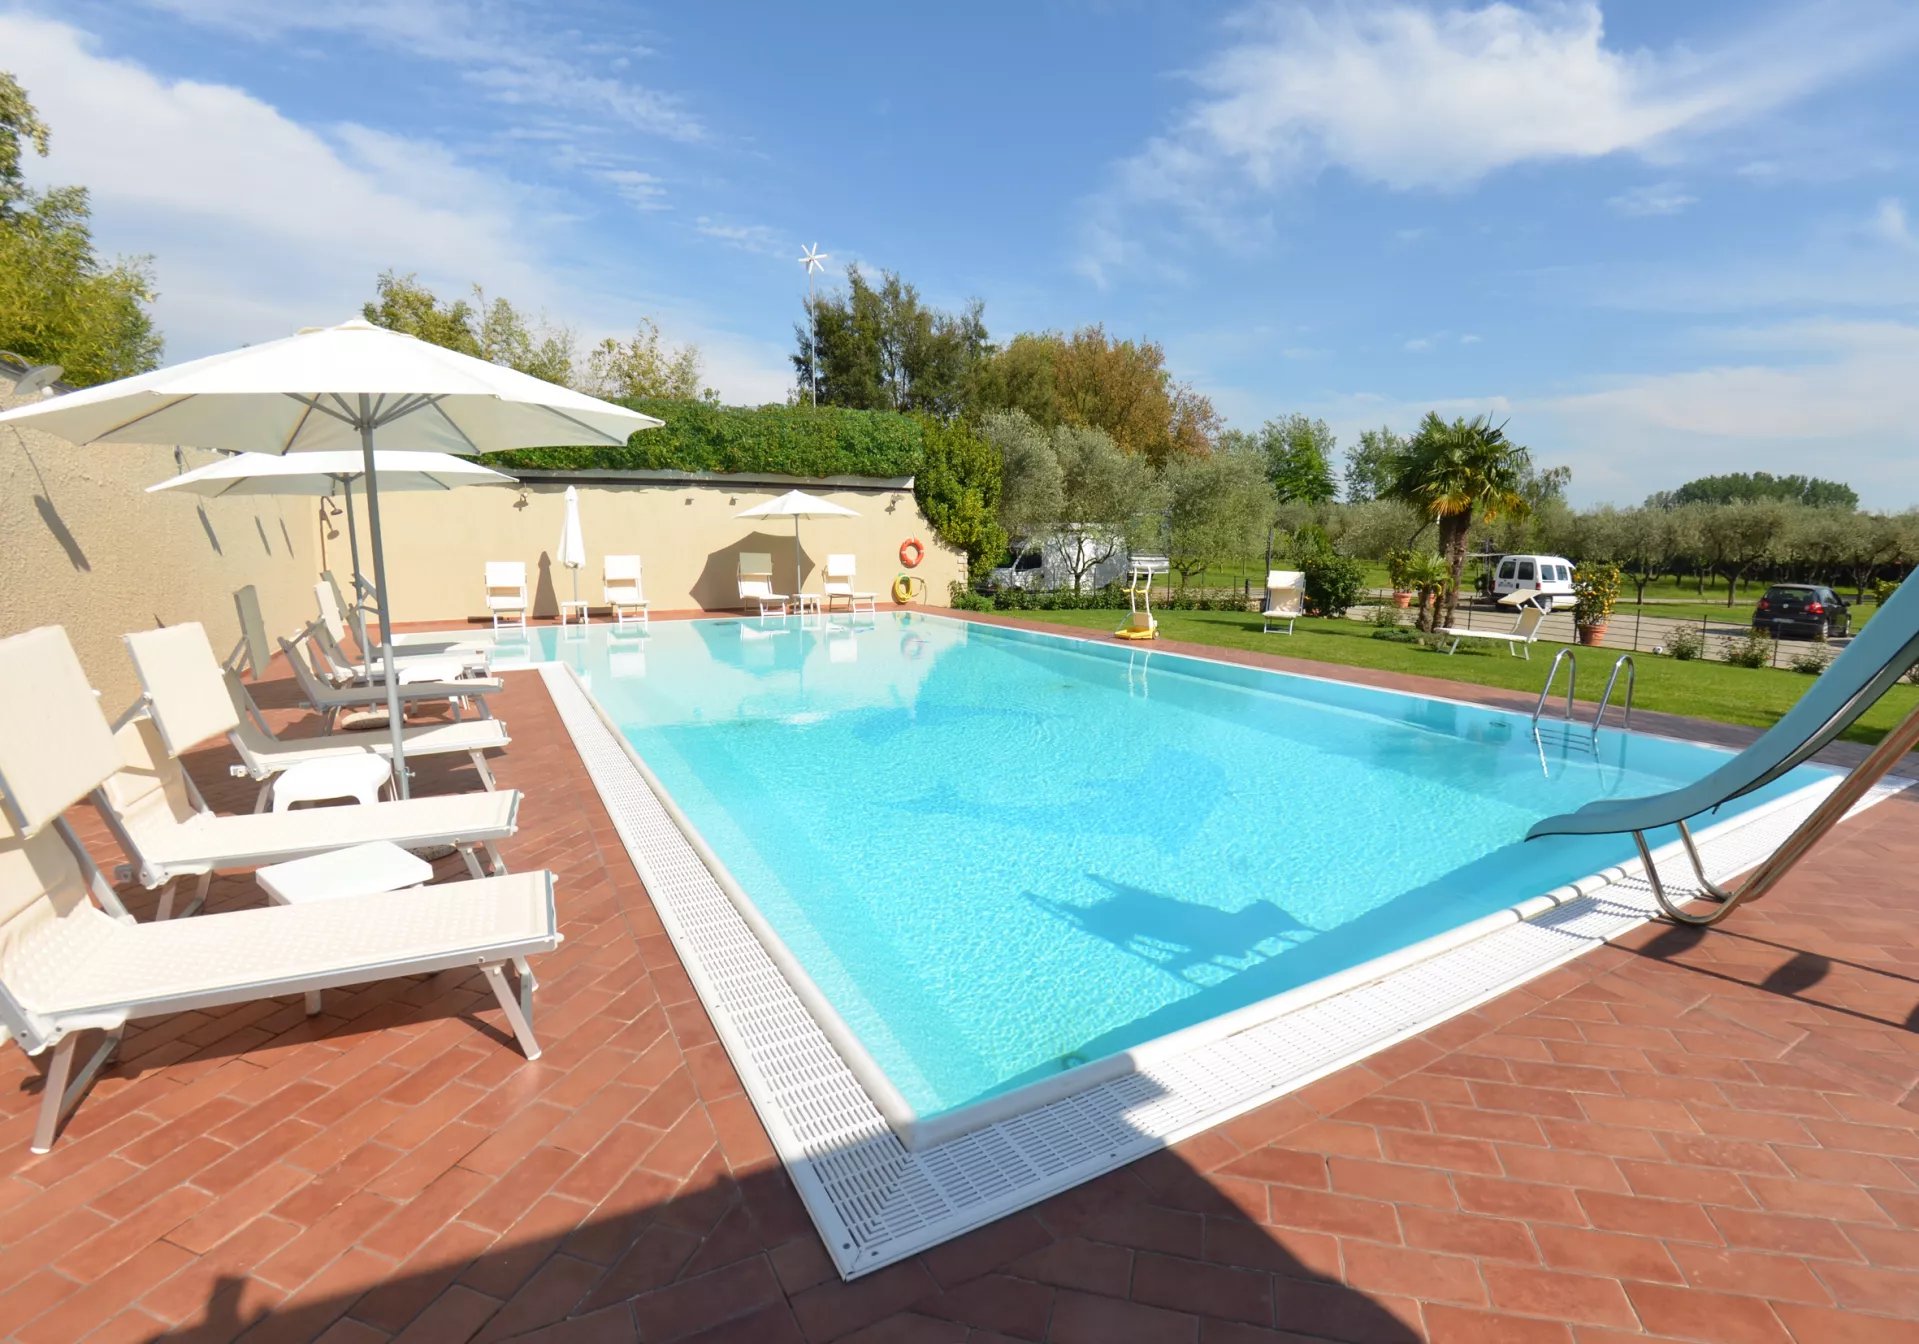 ITALY, TUSCANY, MONTECARLO, FARMHOUSE WITH POOL, FROM EURO 2070 PER WEEK, FOR 8 PEOPLE